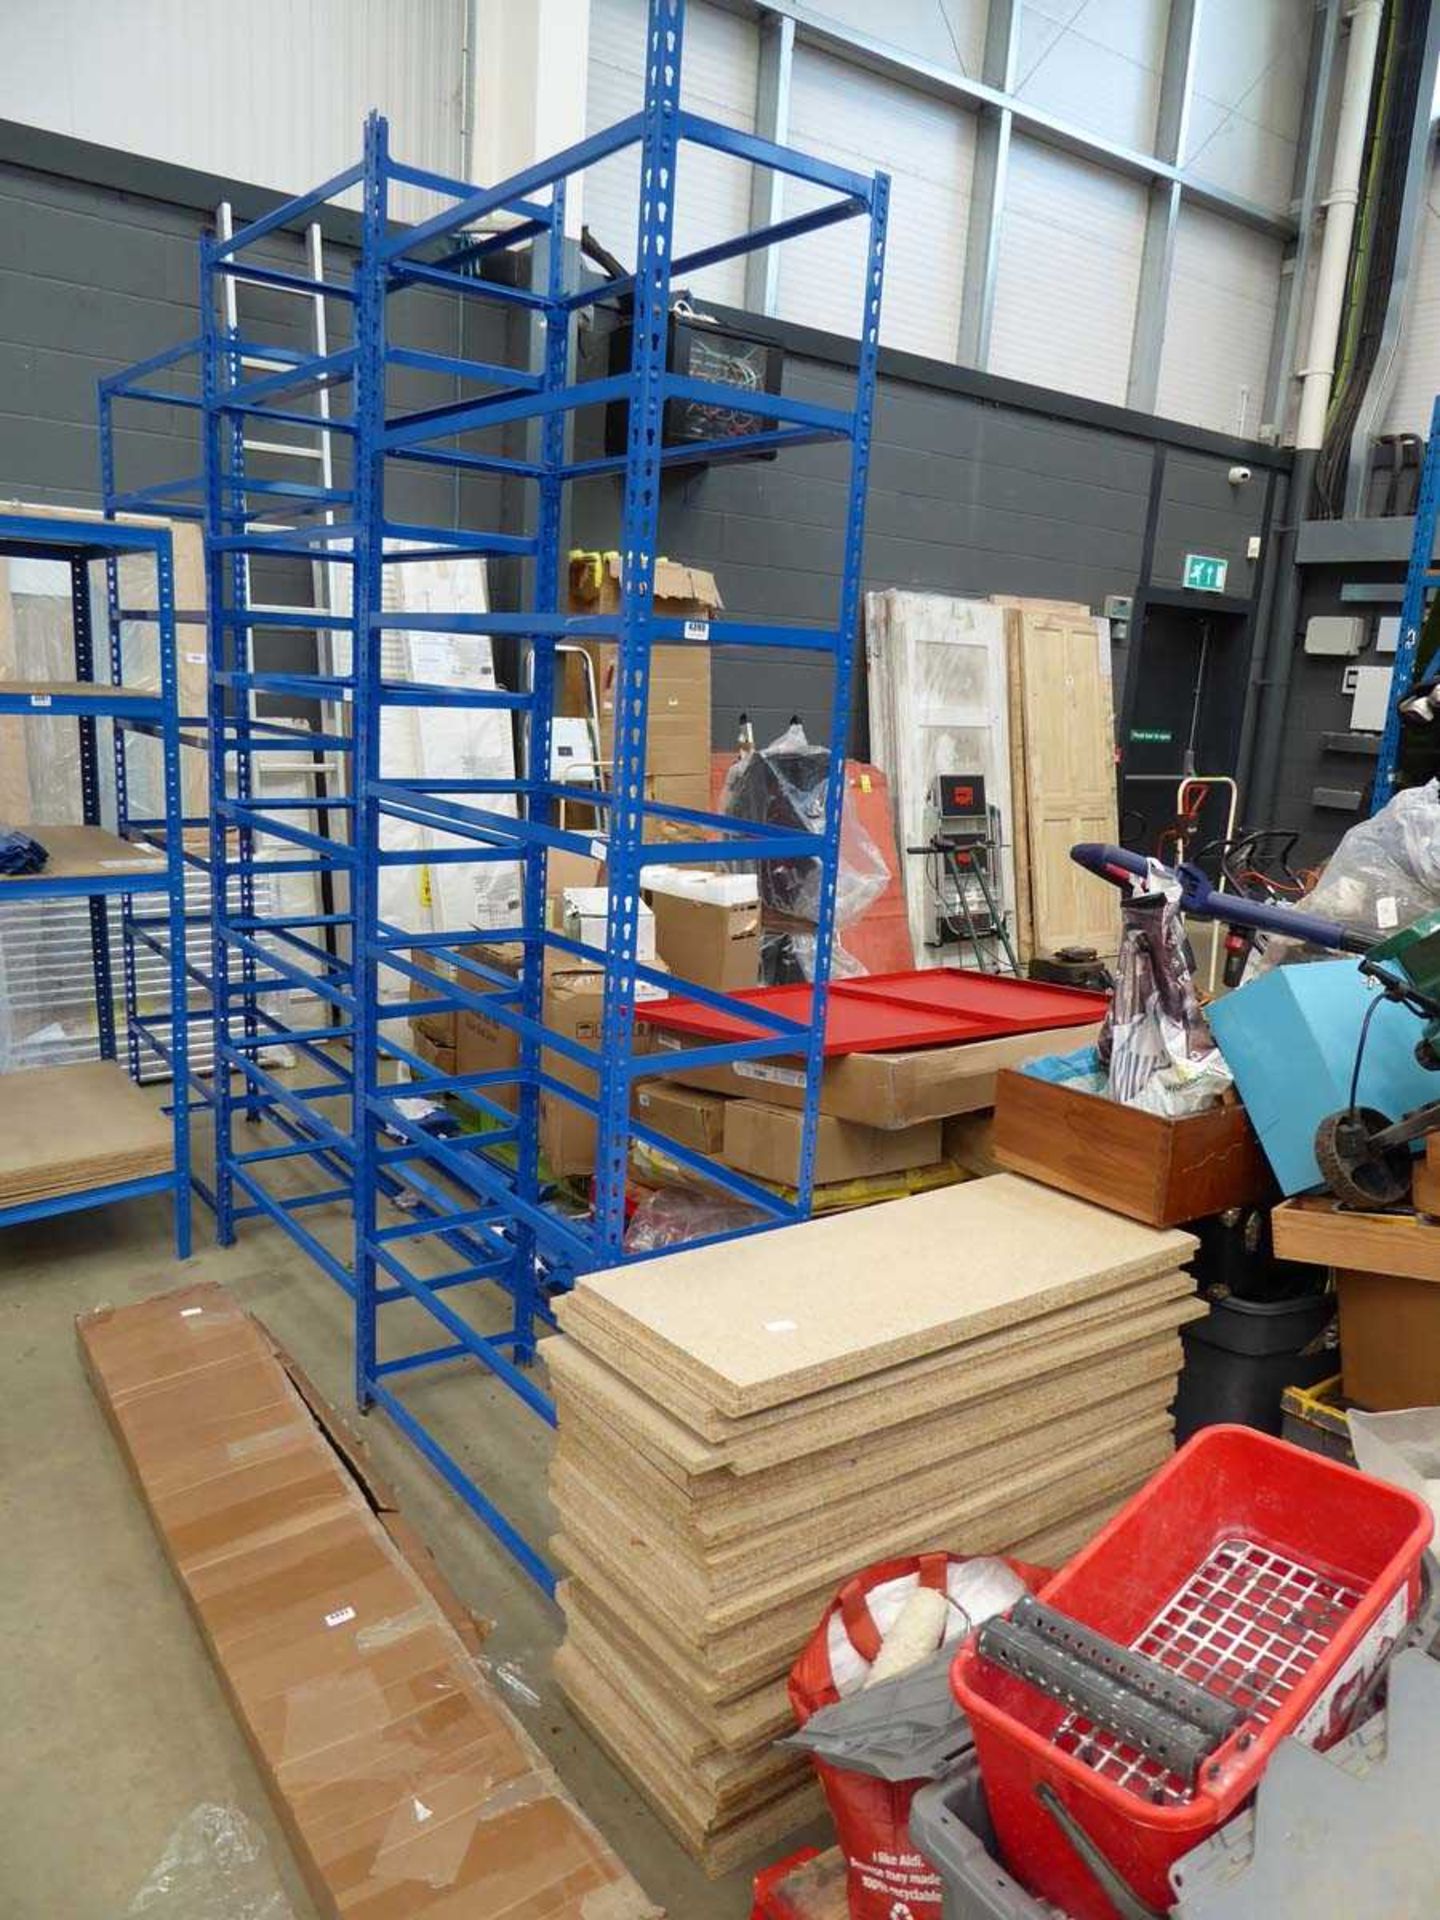 3 made-up bays, and 2 flatpack bays of blue high racking with chipboard shelves